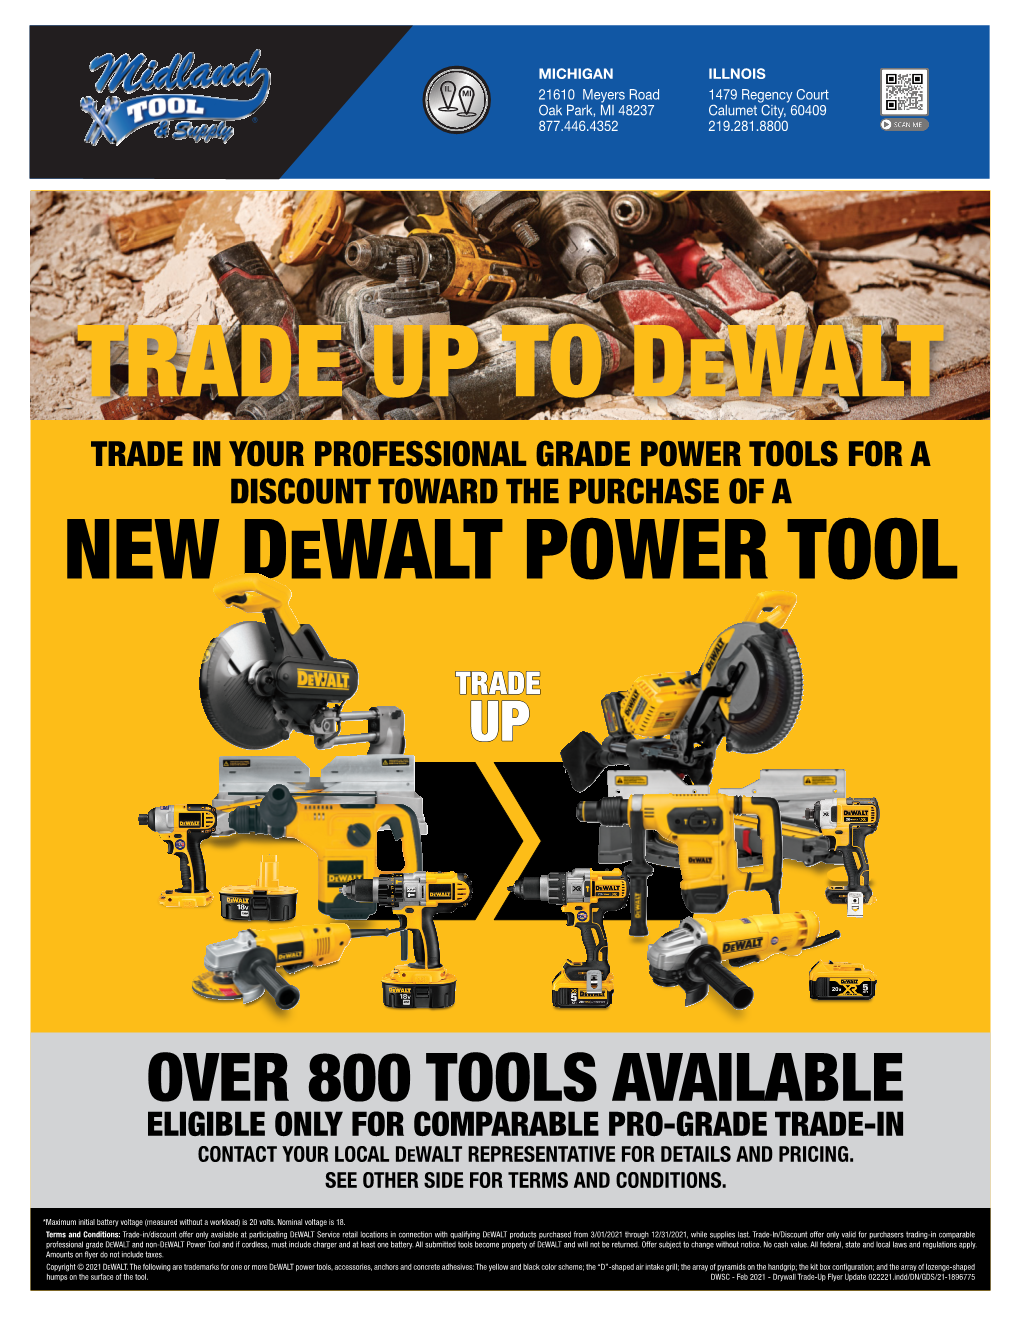 Trade up to Dewalt Trade in Your Professional Grade Power Tools for a Discount Toward the Purchase of a New Dewalt Power Tool